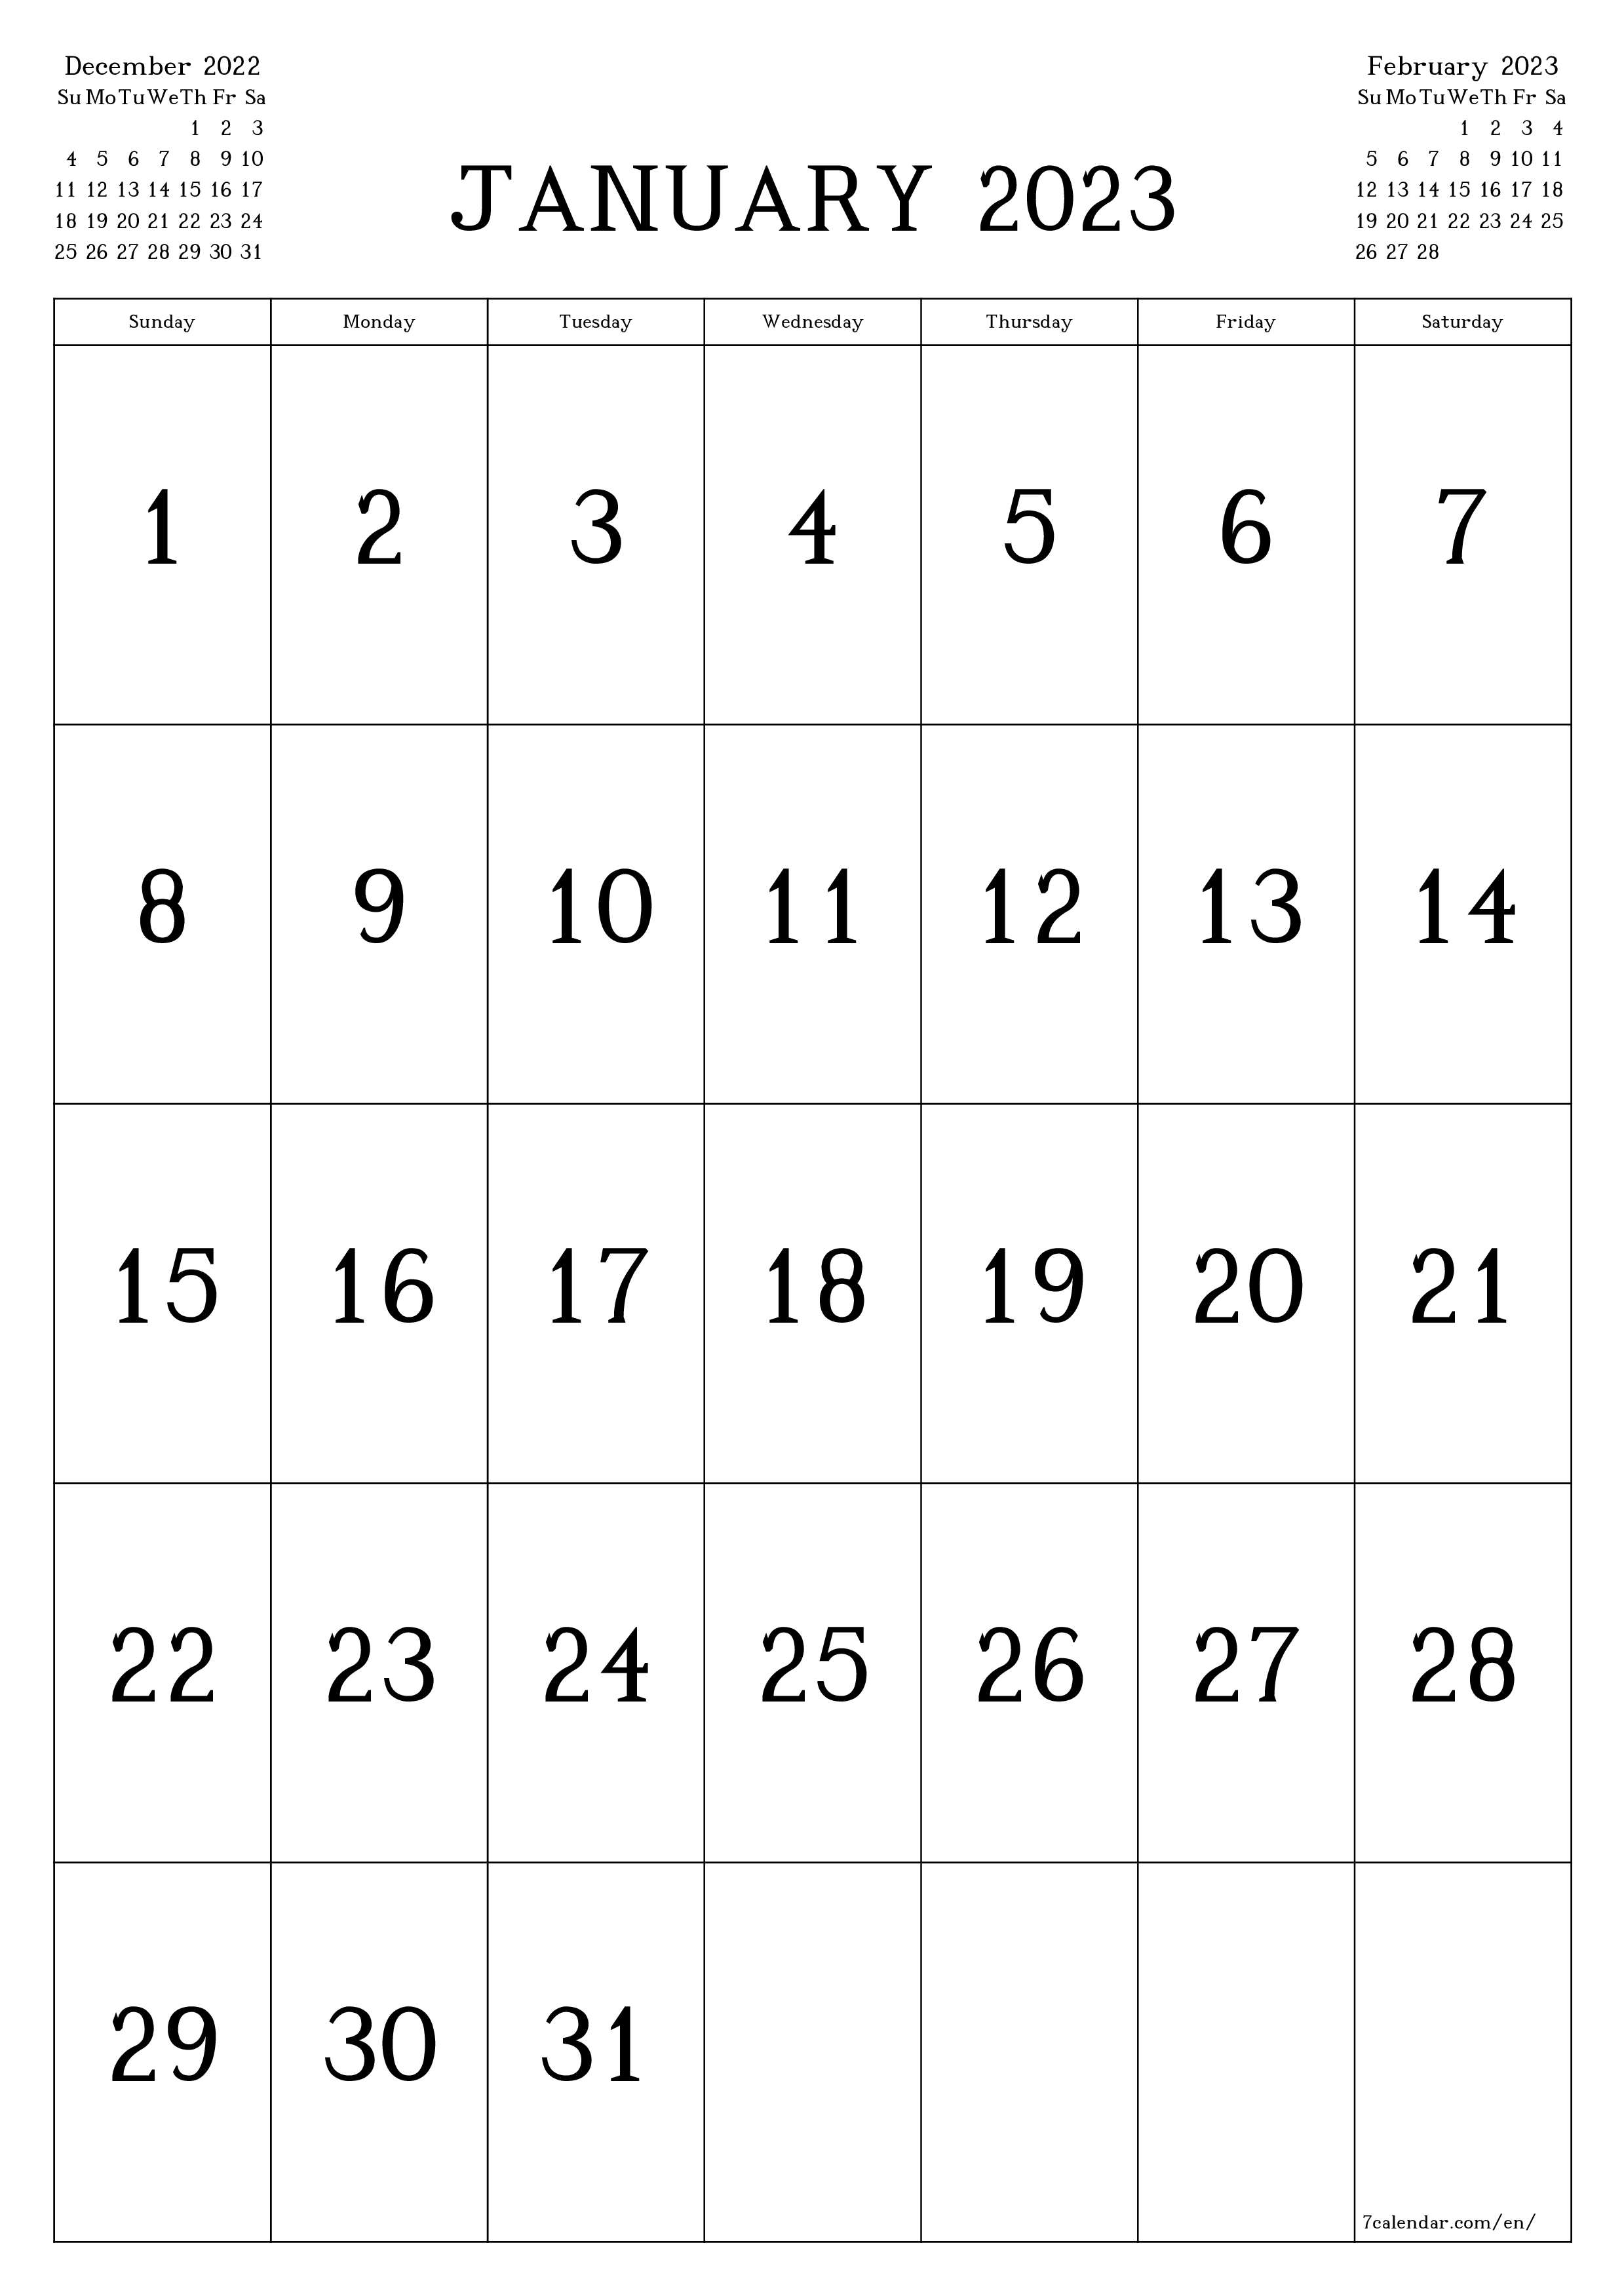 Blank monthly dated HD template image of calendar for month January 2023 save and print to PDF PNG English - 7calendar.com